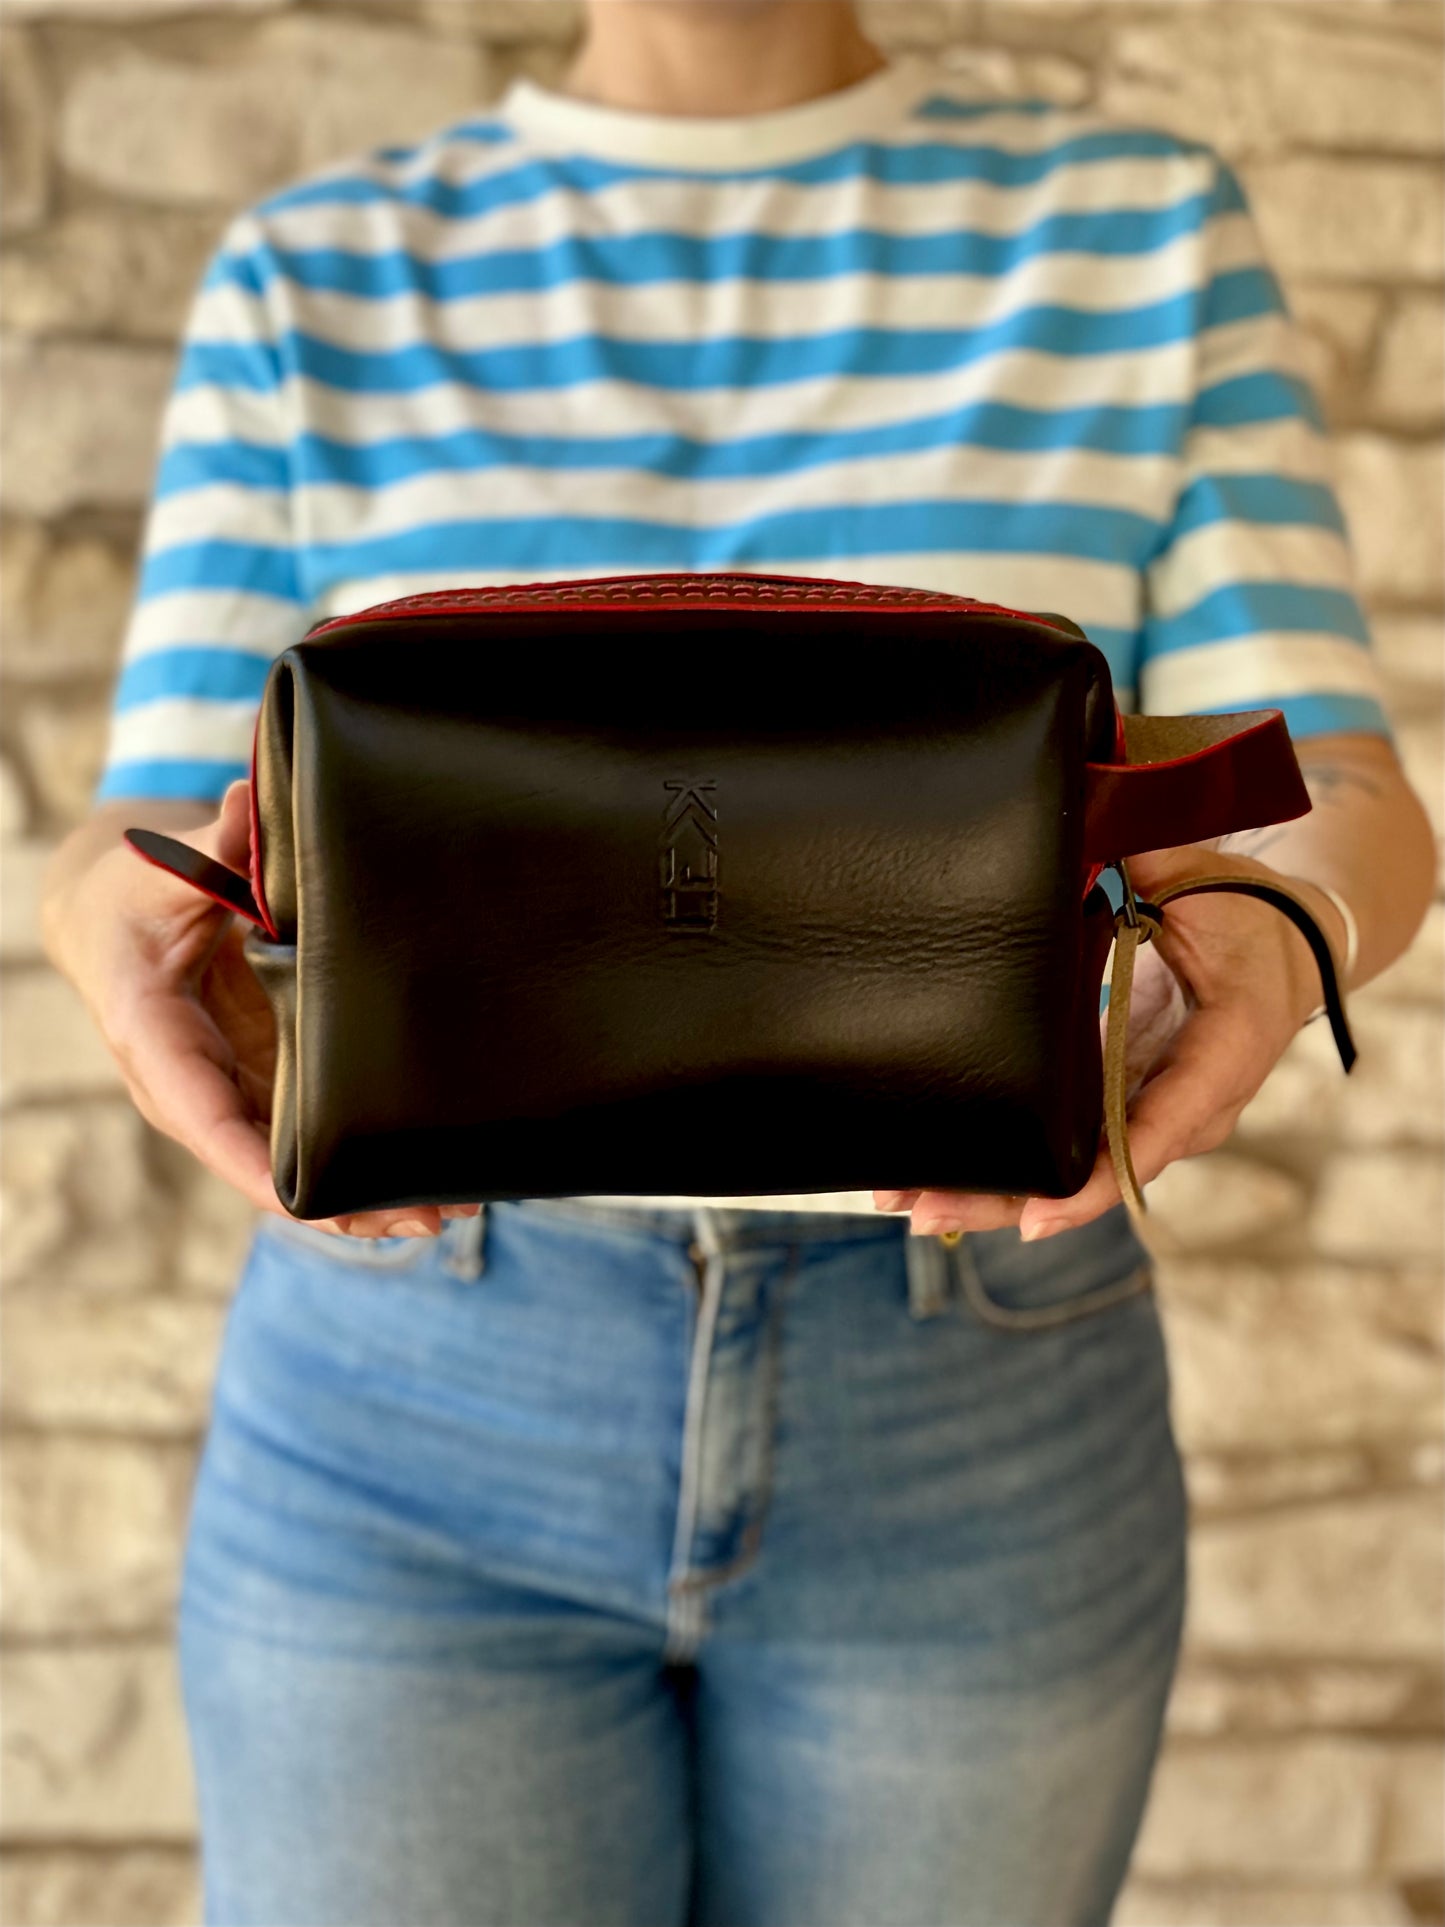 Kaiju Cut and Sew Black Horween Leather Dopp Kit with Japanese Fabric liner | Handmade in Austin, Texas